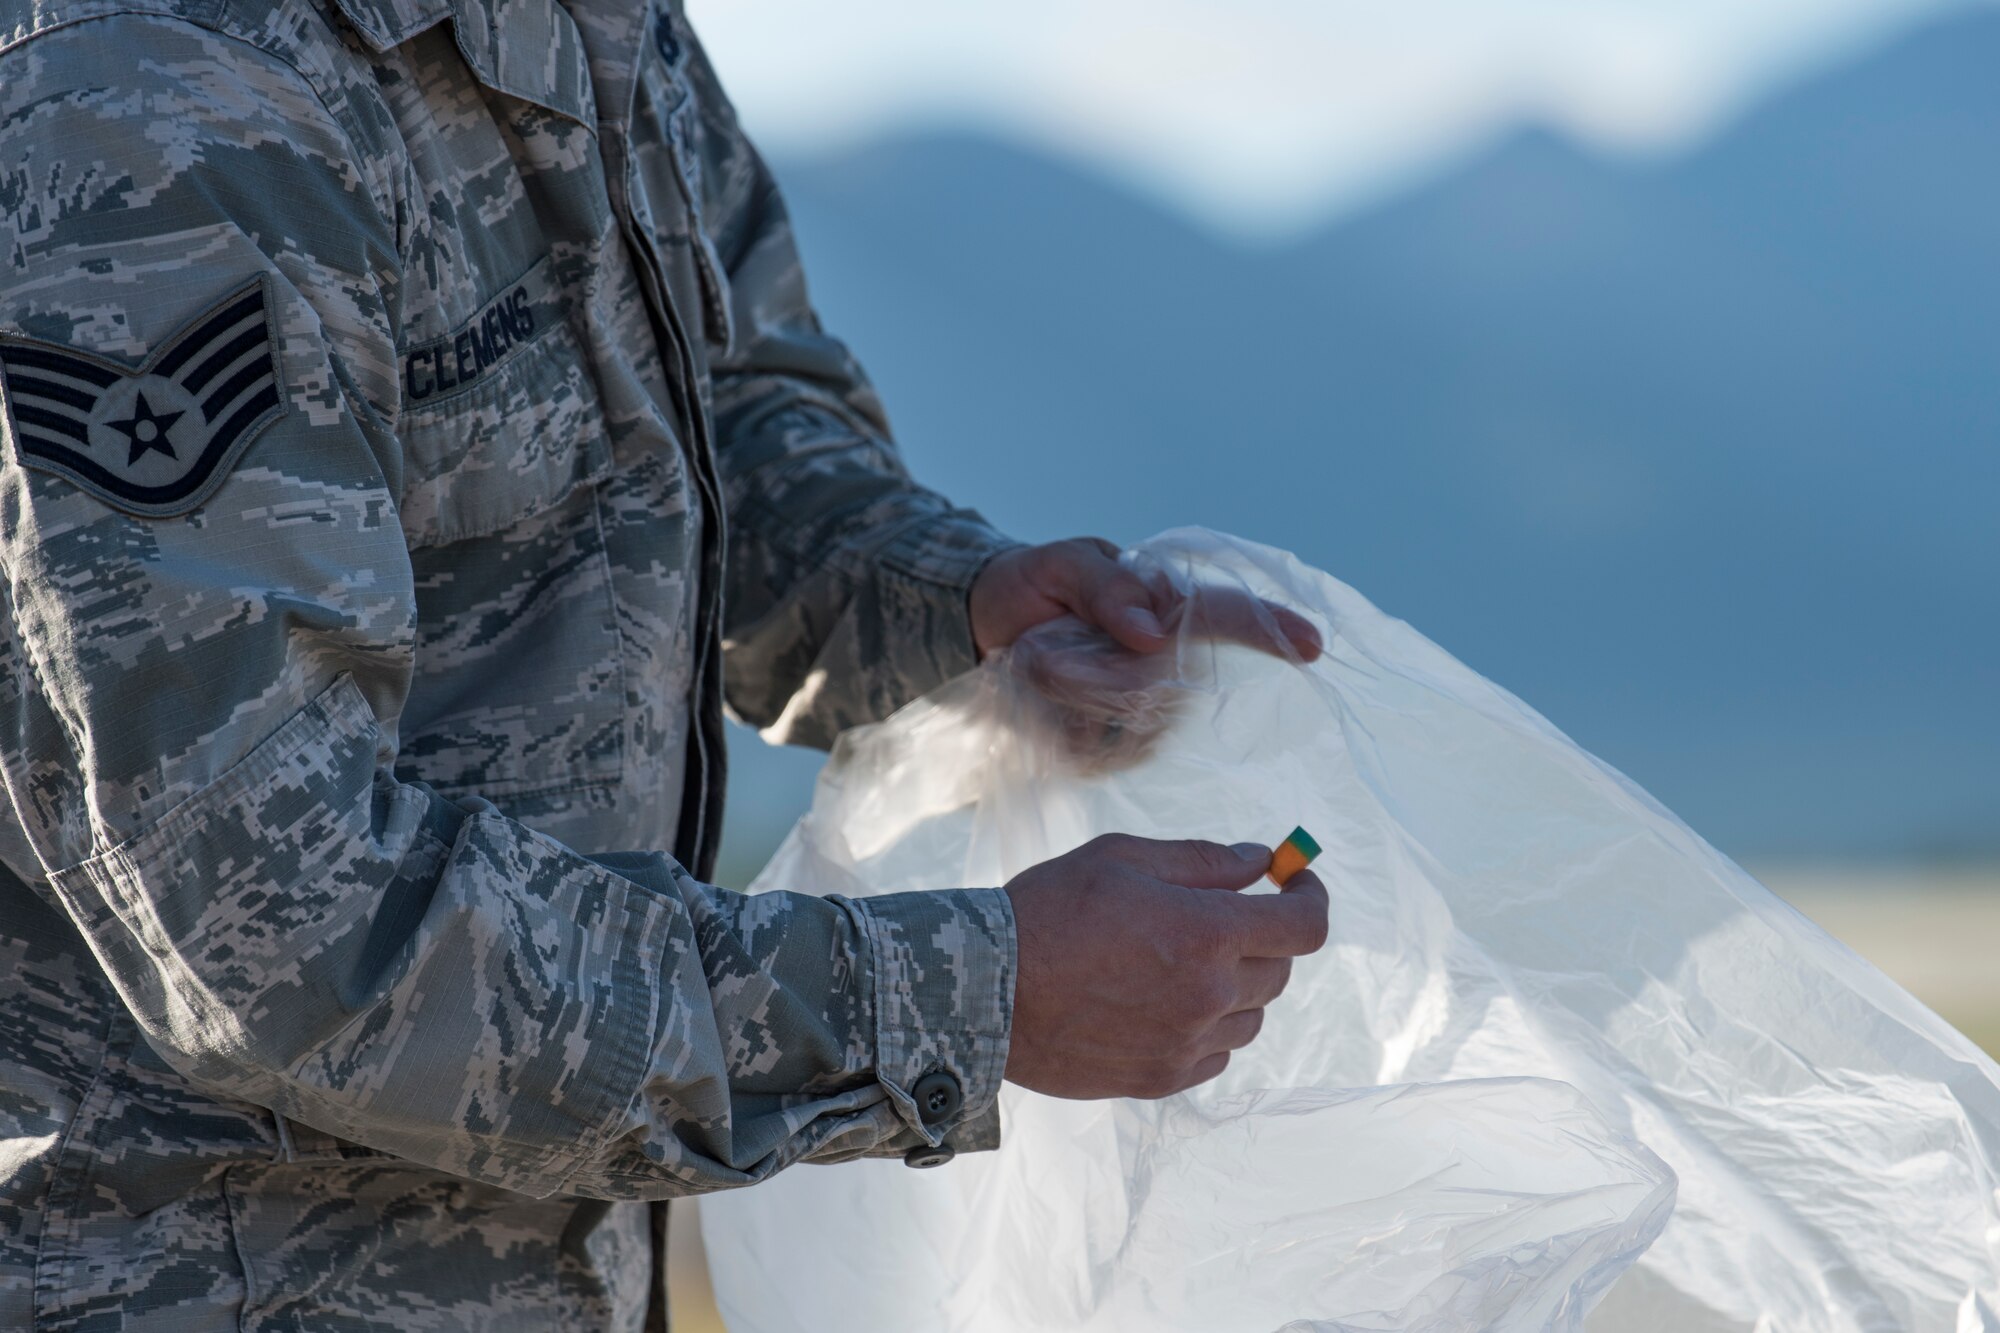 Staff Sgt. Andrew Clemens, a 3rd Munitions Squadron muntions systems crew chief, picks up a discarded ear plug during a foreign object and debris walk at Joint Base Elmendorf-Richardson, Alaska, July 2, 2018. The JBER Airmen conducted the FOD walk after the Arctic Thunder Open House to remove debris that could damage aircraft and hinder mission readiness.